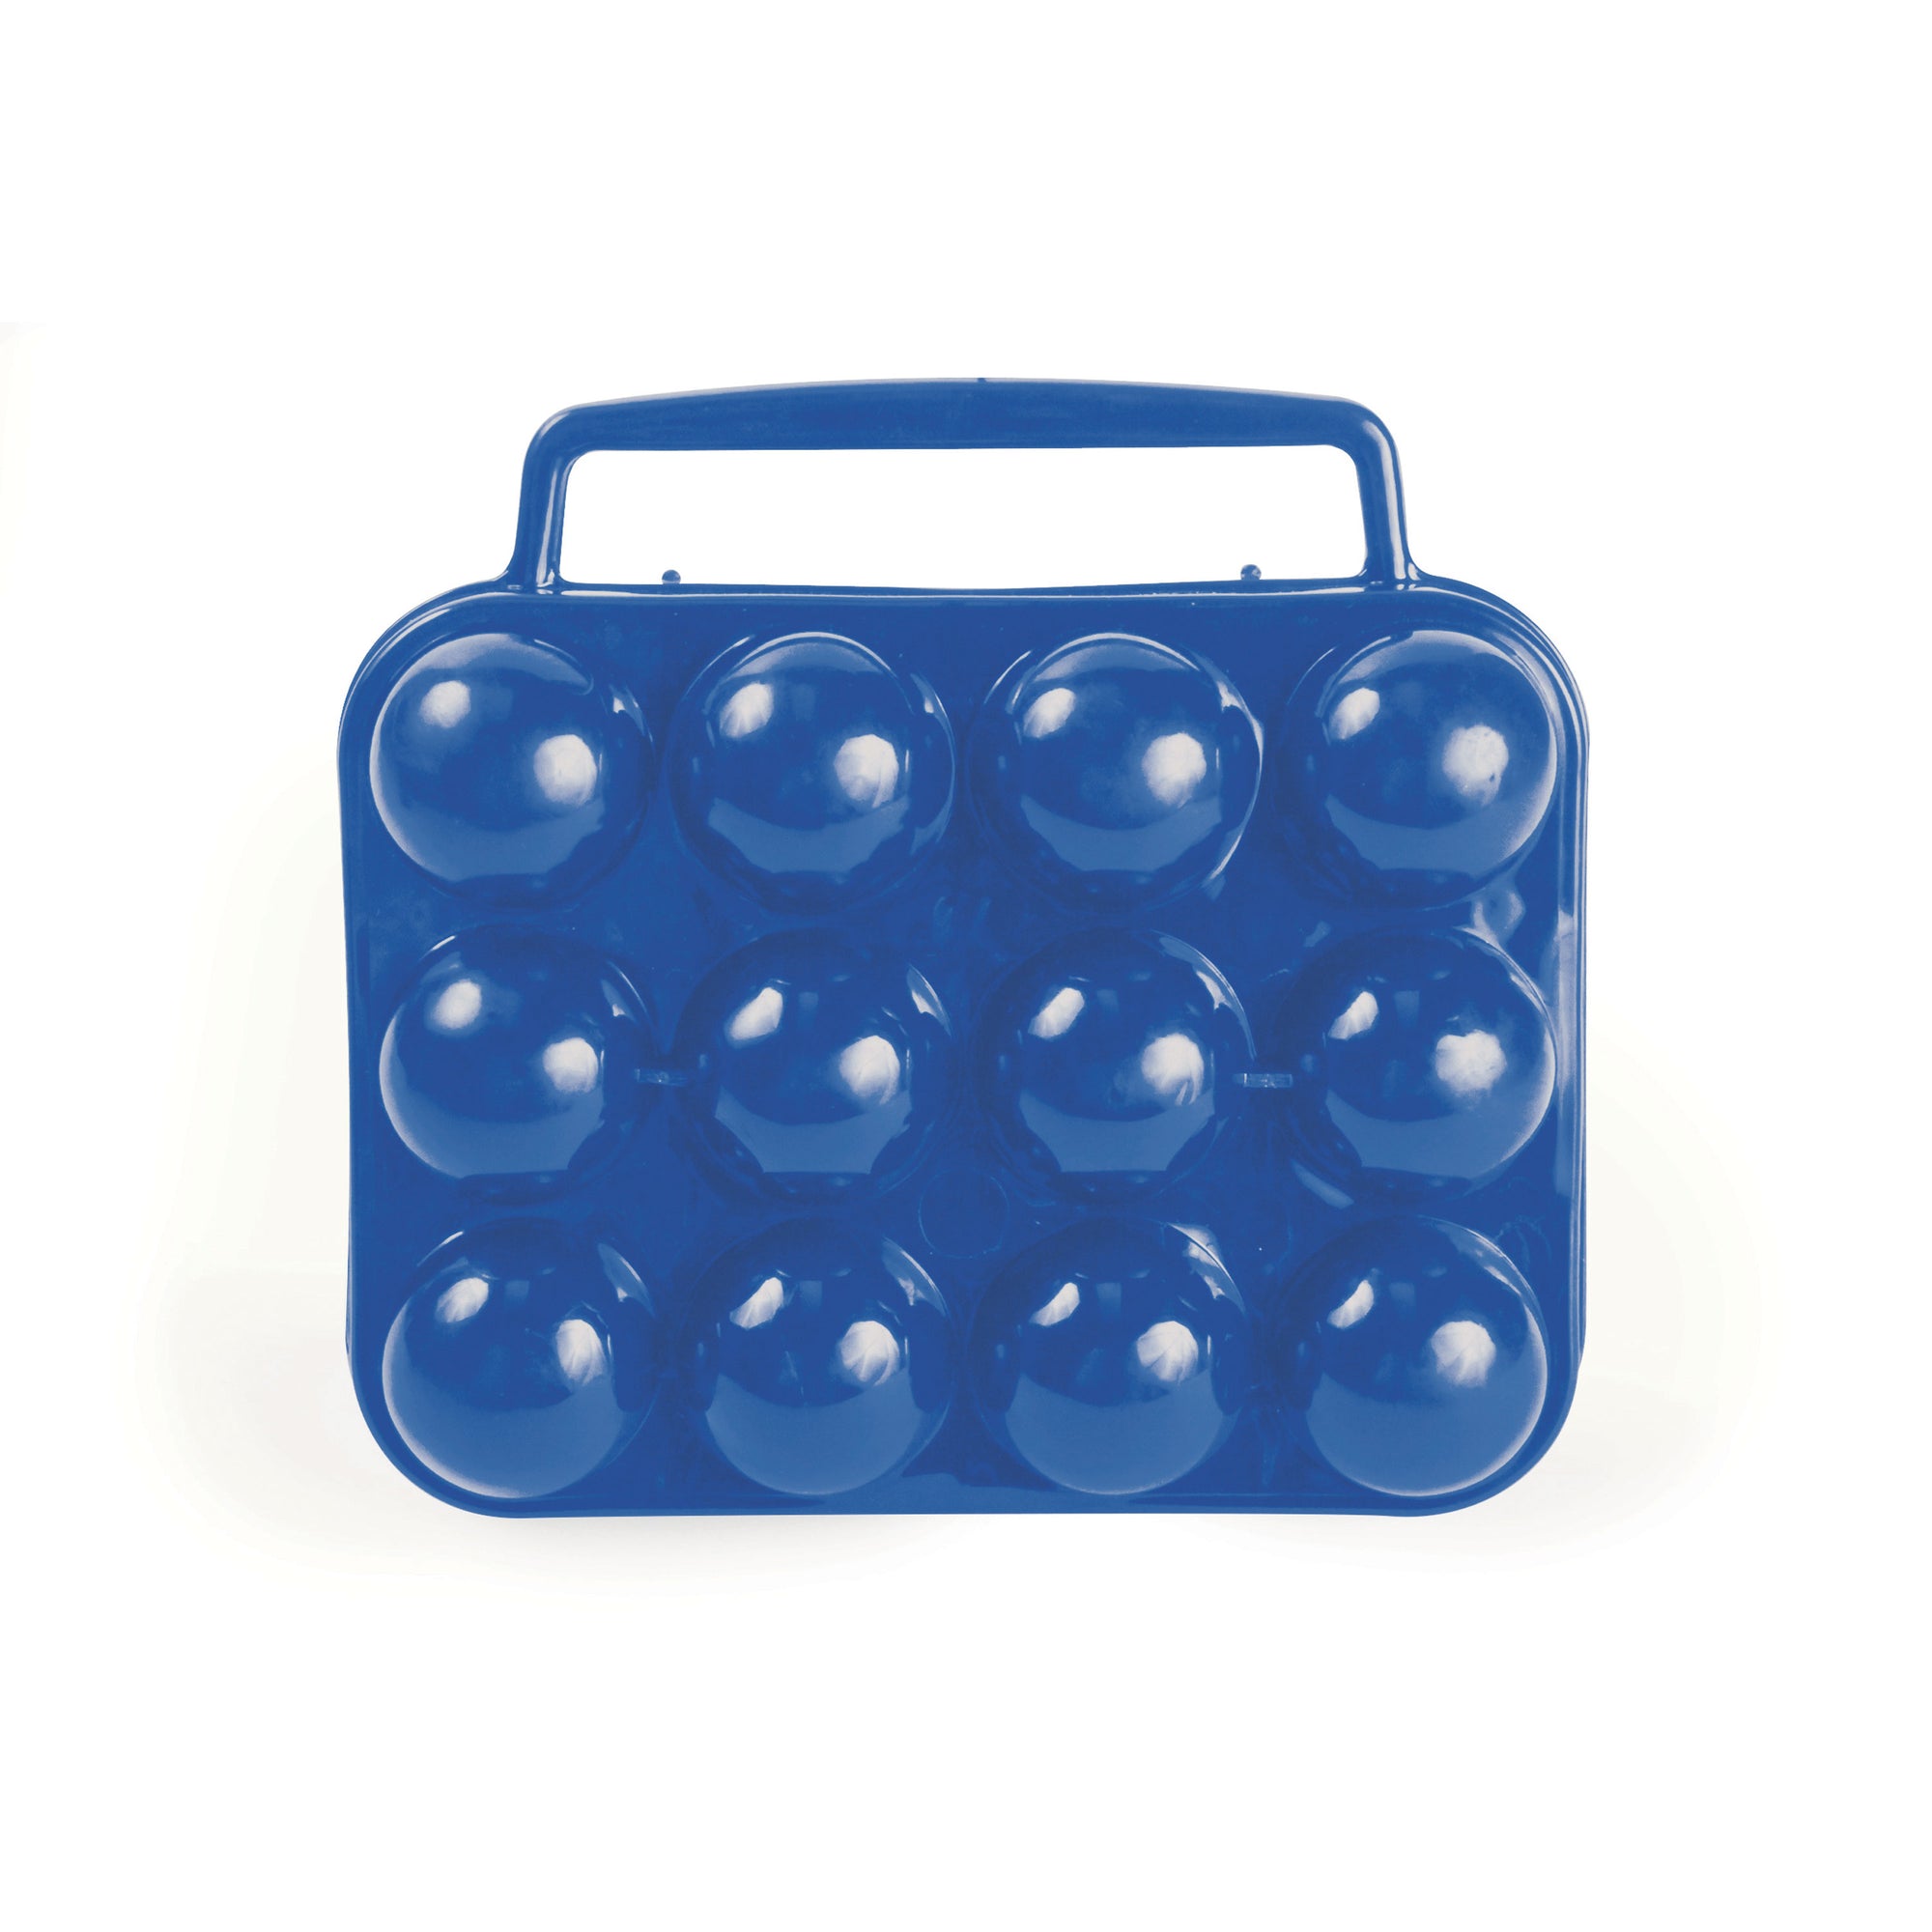 Camco 51015 Egg Carrier - Holds 12 Eggs